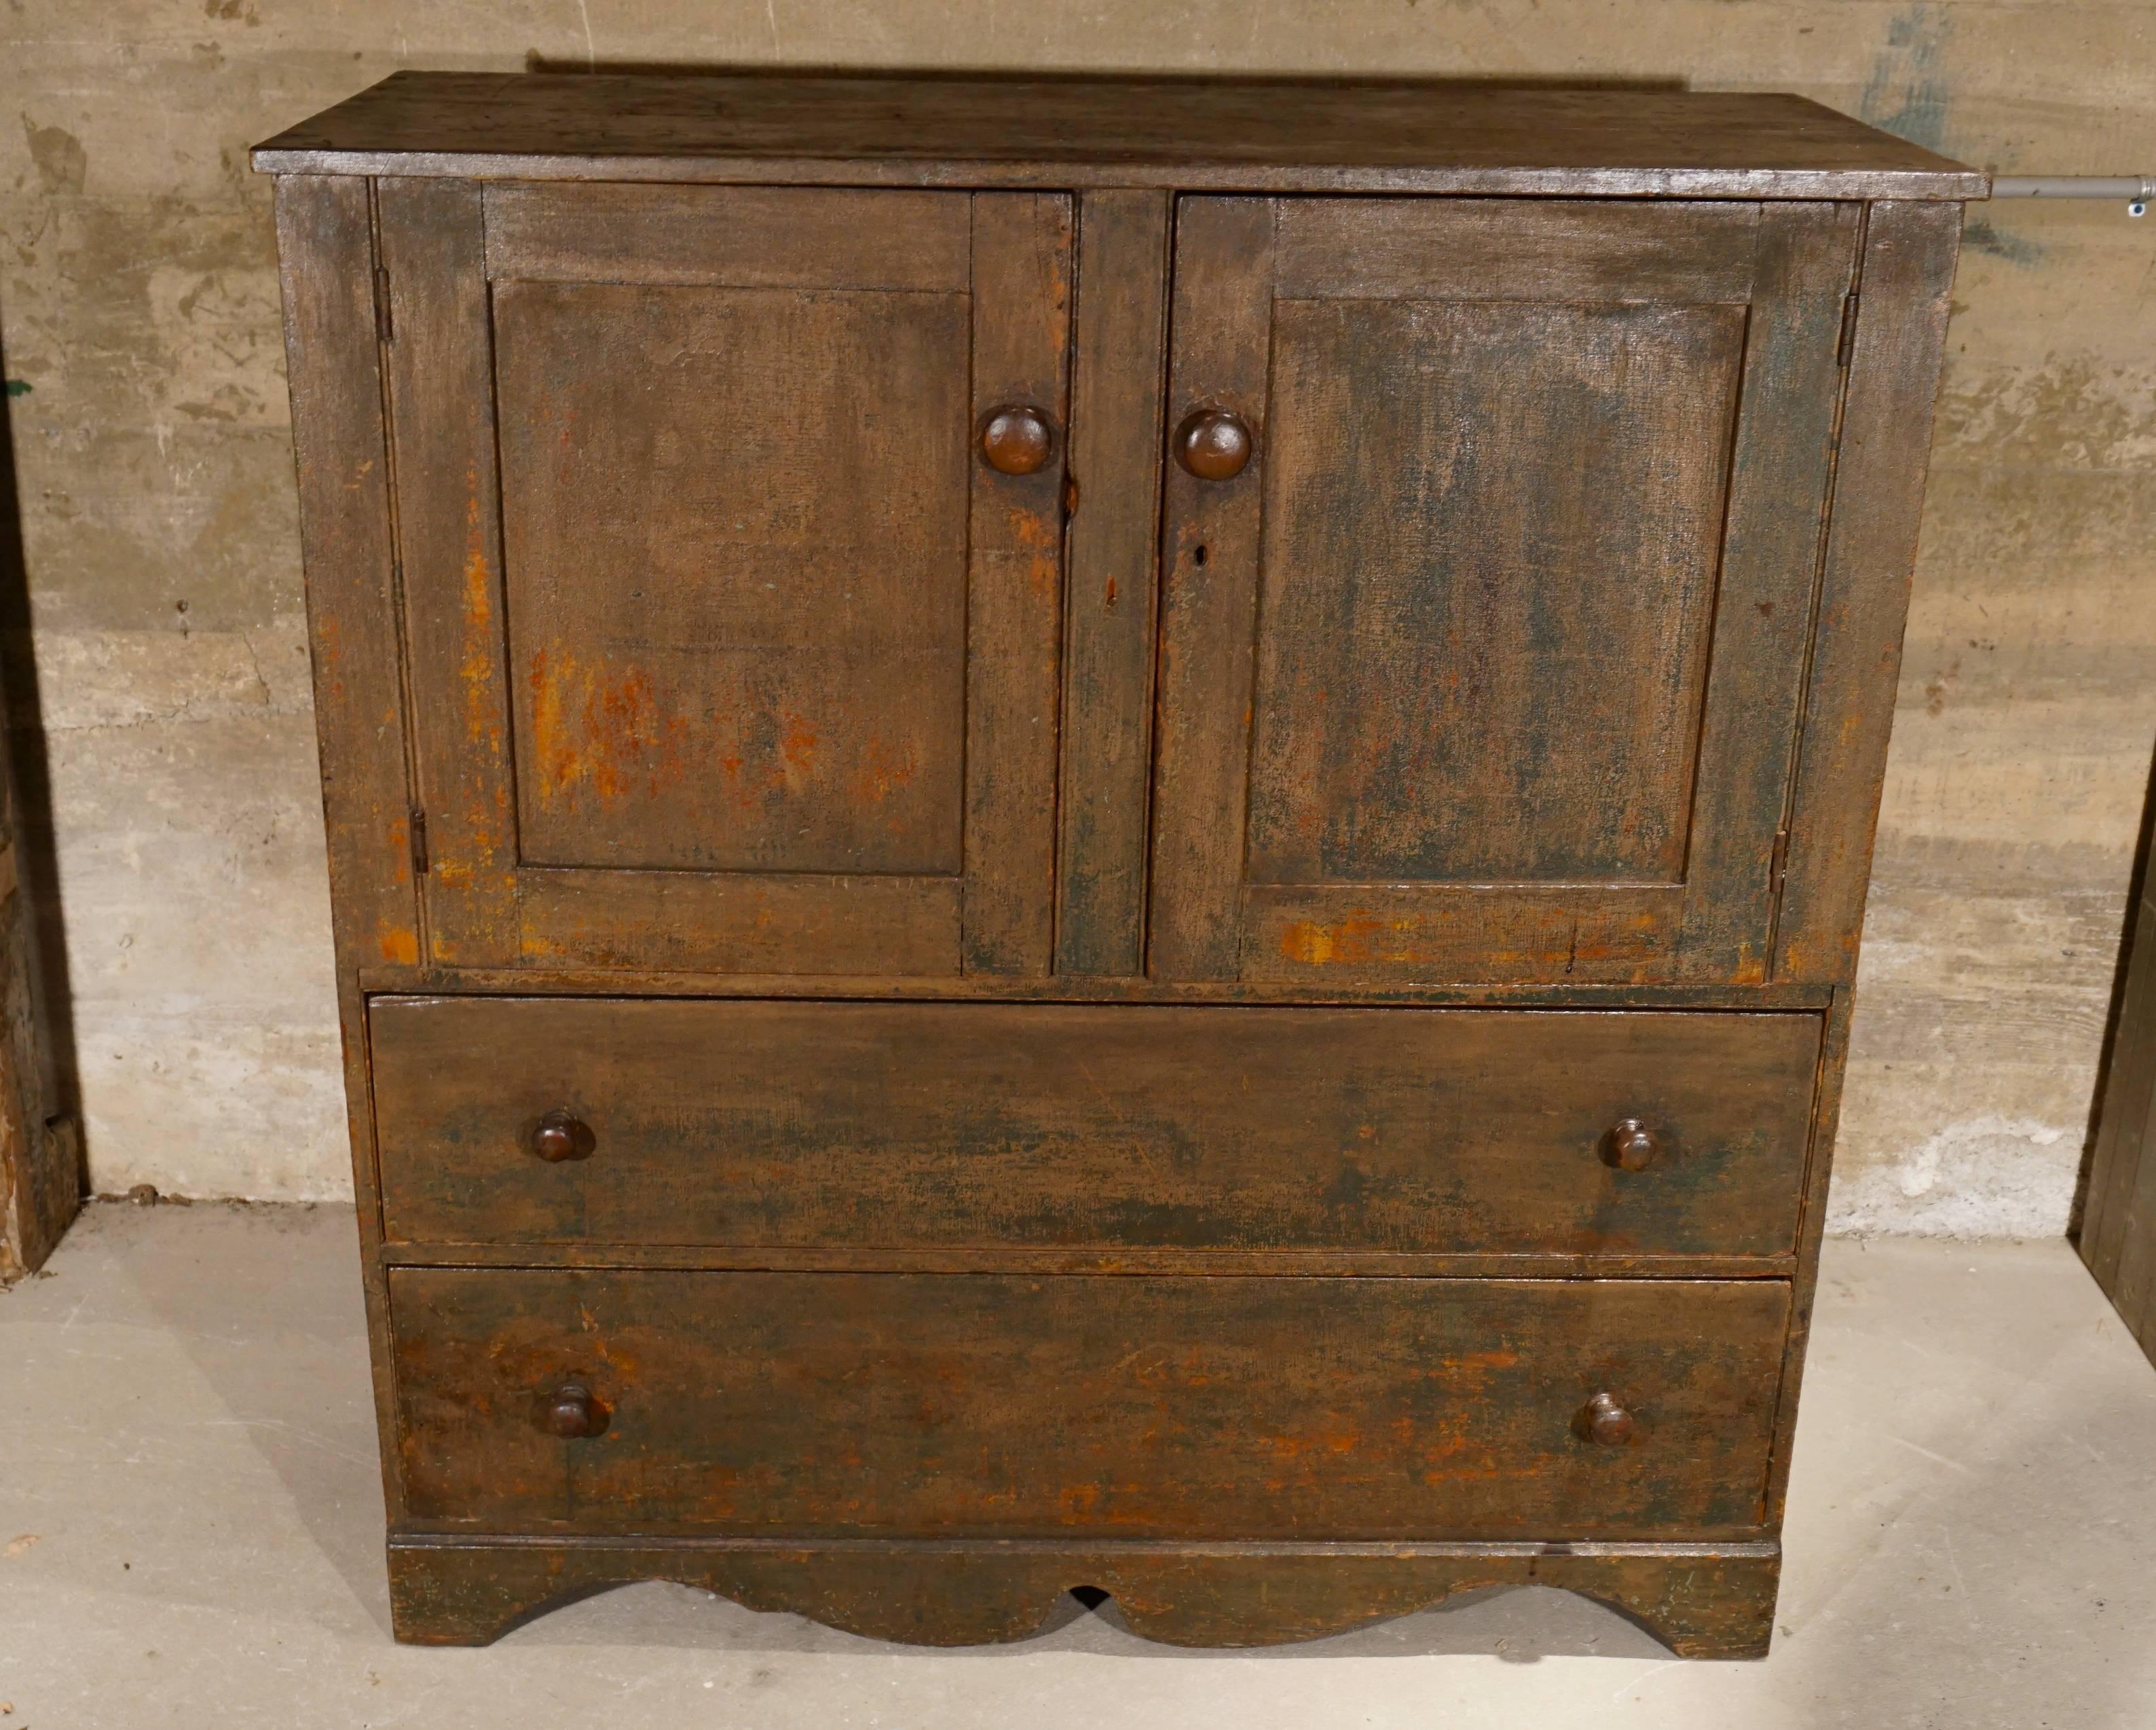 Superb 19th Century American Cupboard in Rustic Paint In Distressed Condition For Sale In Hudson, NY